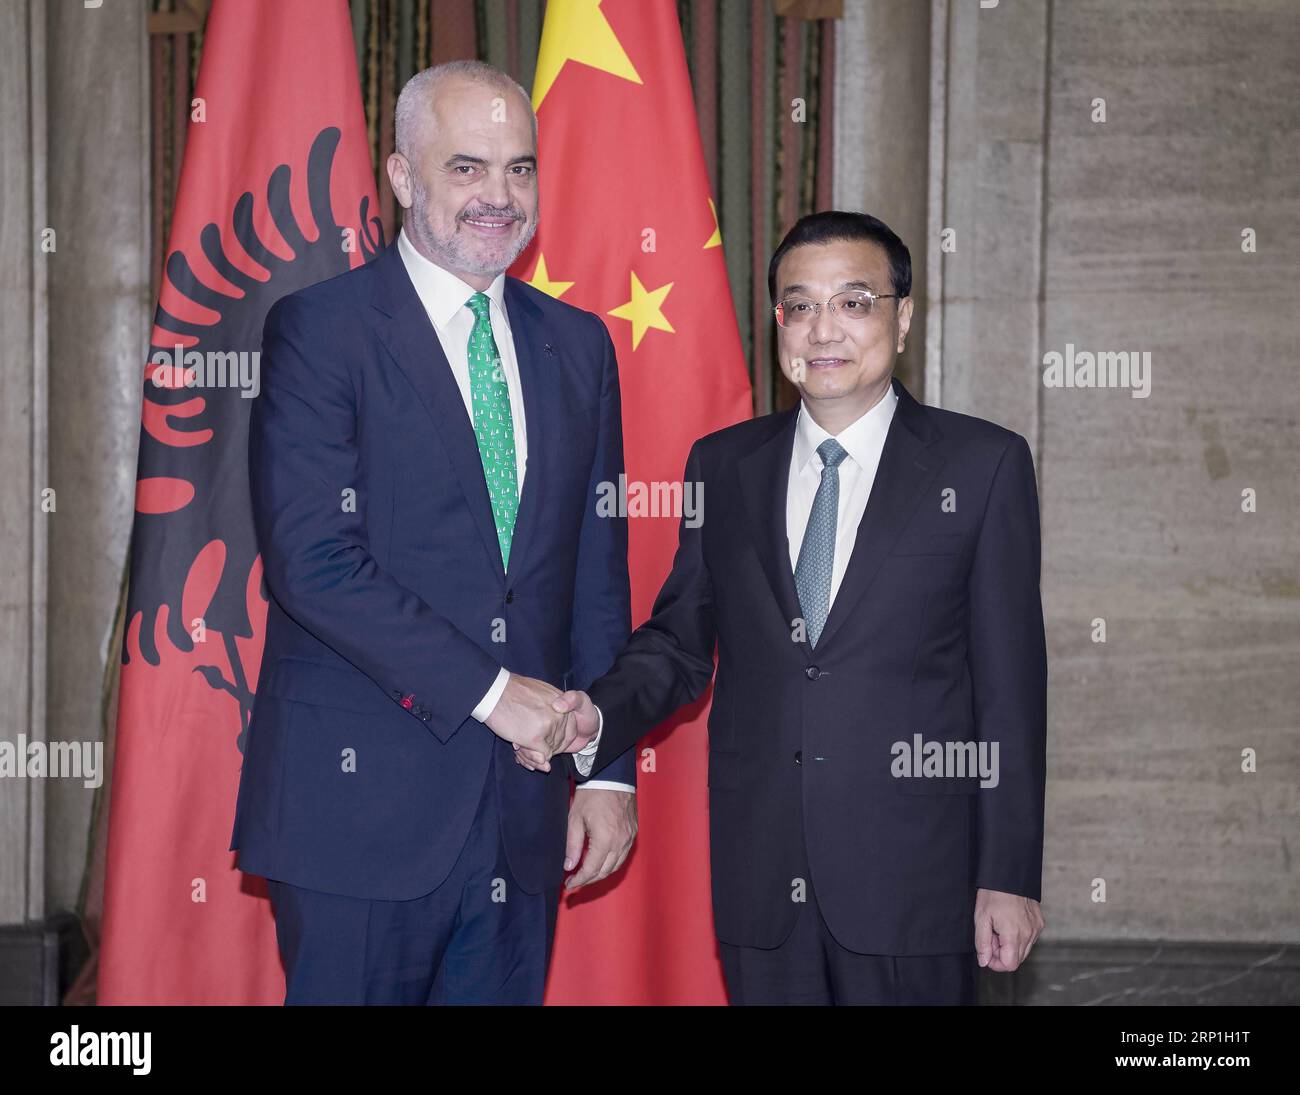 (180706) -- SOFIA, July 6, 2018 -- Chinese Premier Li Keqiang meets with Albanian Prime Minister Edi Rama in Sofia, Bulgaria, July 6, 2018. Both leaders are in the Bulgarian capital to attend the seventh leaders meeting of China and 16 Central and Eastern European countries. )(mcg) BULGARIA-SOFIA-LI KEQIANG-ALBANIAN PM-MEETING LixTao PUBLICATIONxNOTxINxCHN Stock Photo